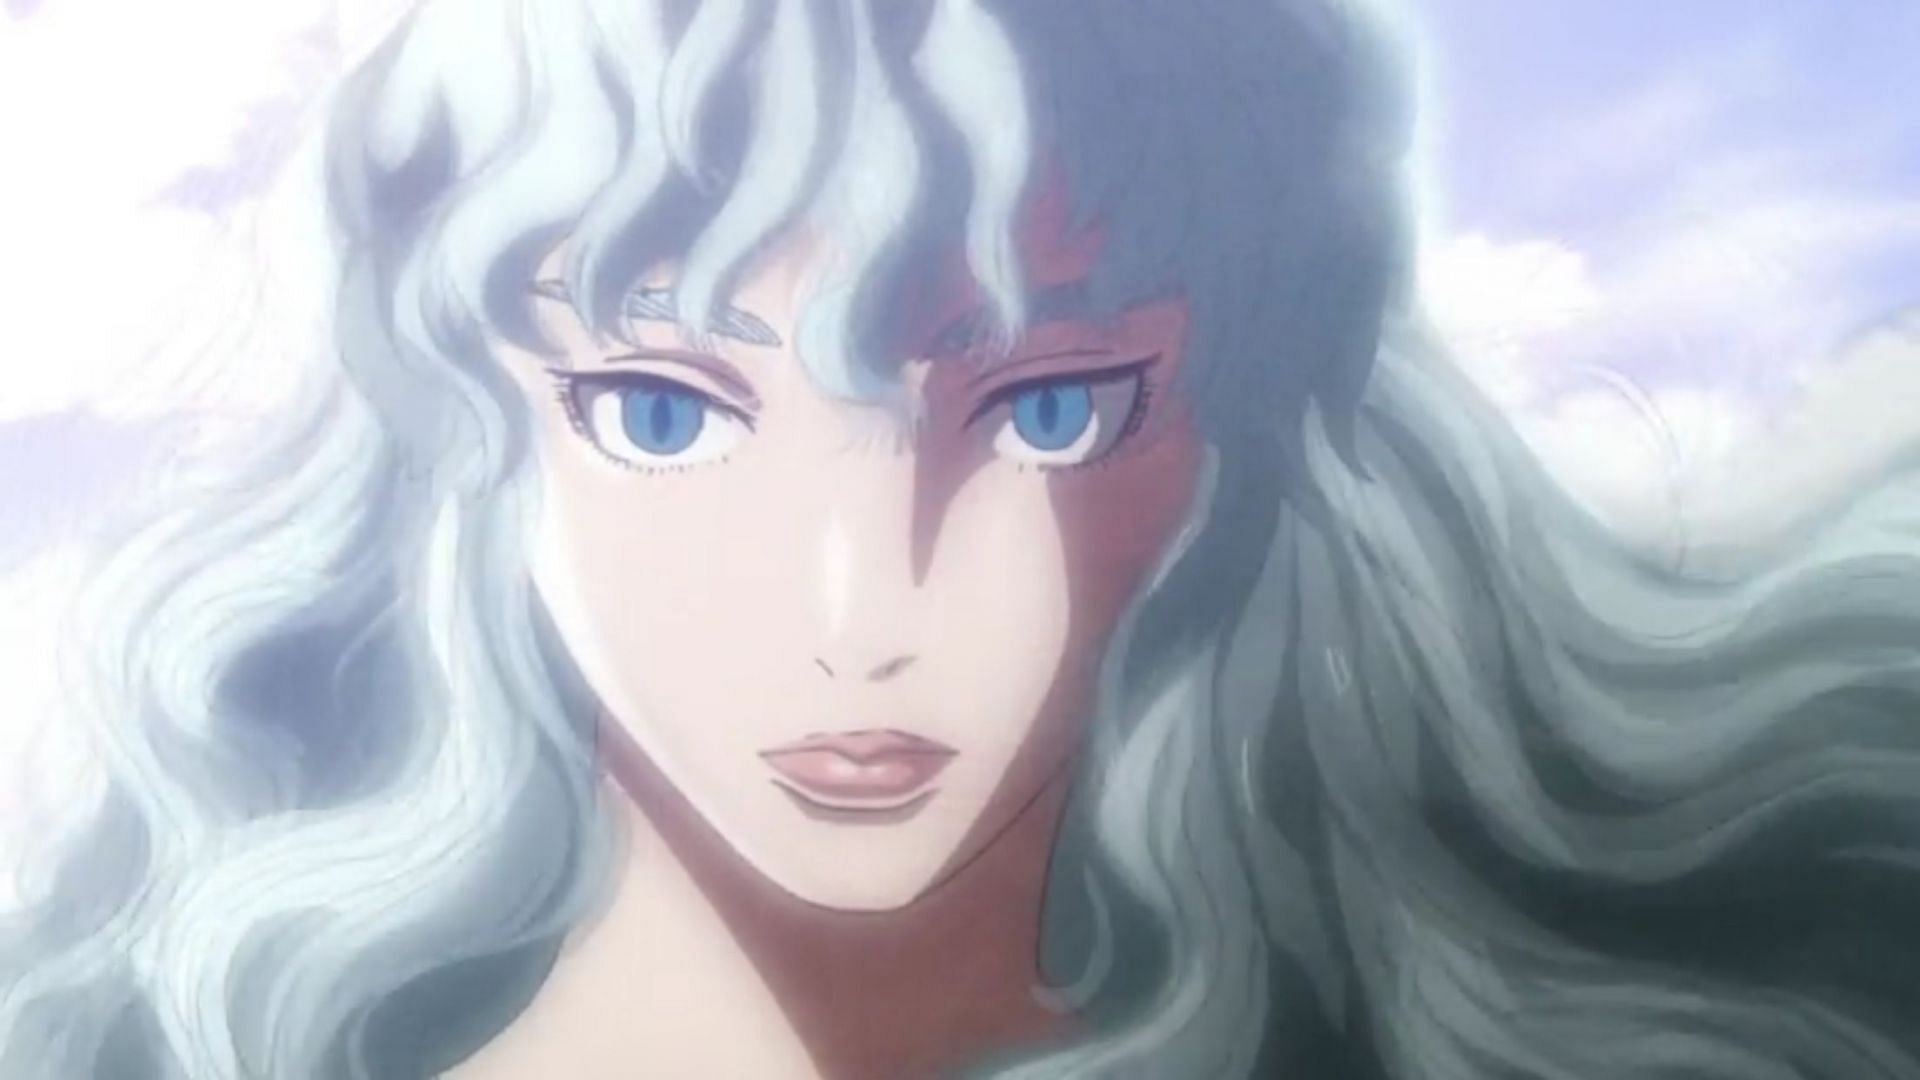 Griffith as seen in the Berserk anime (Image via Millepensee, GEMBA)